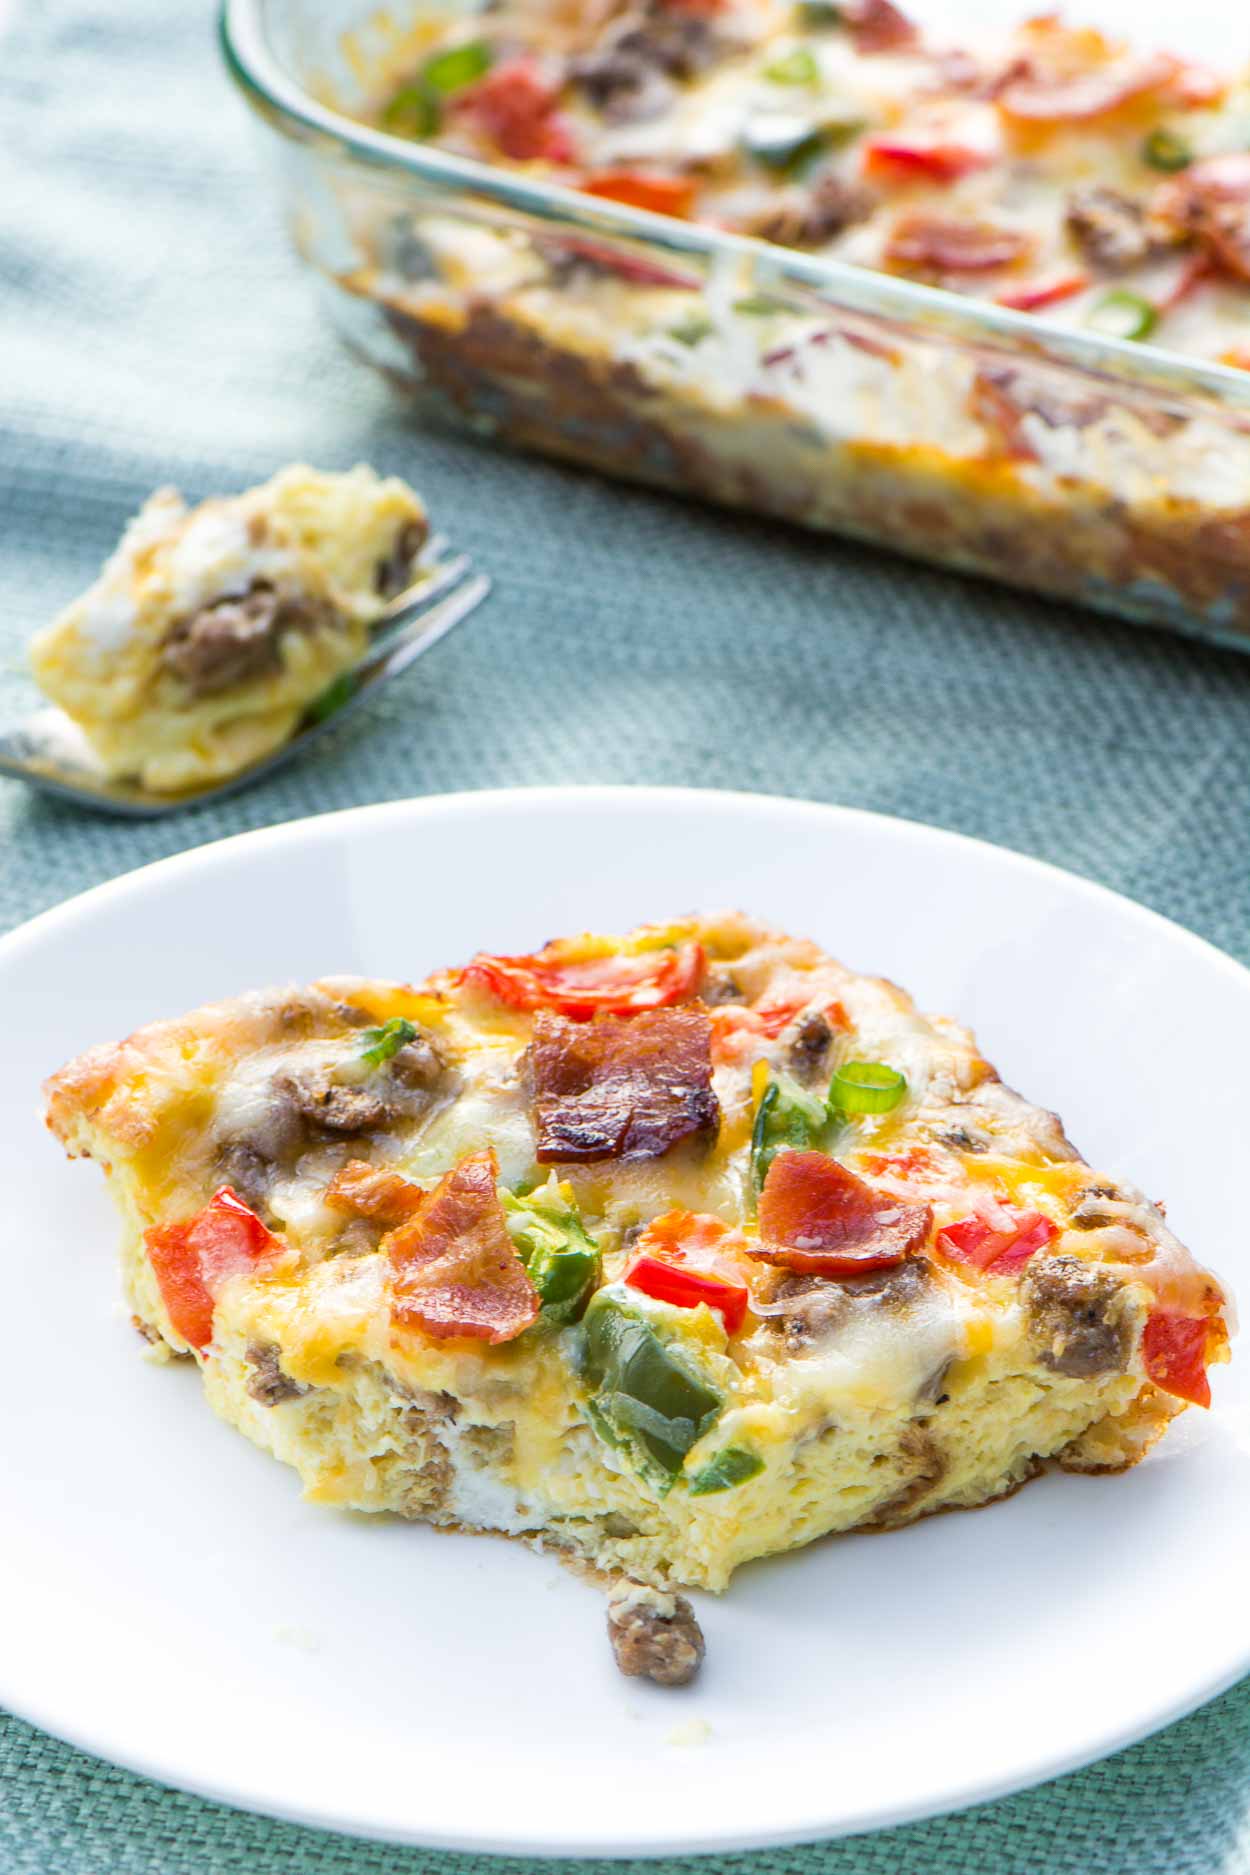 A healthy, fully loaded breakfast casserole topped with fresh veggies, meats and blends of cheeses. Breakfast is served! www.simplerevisions.com